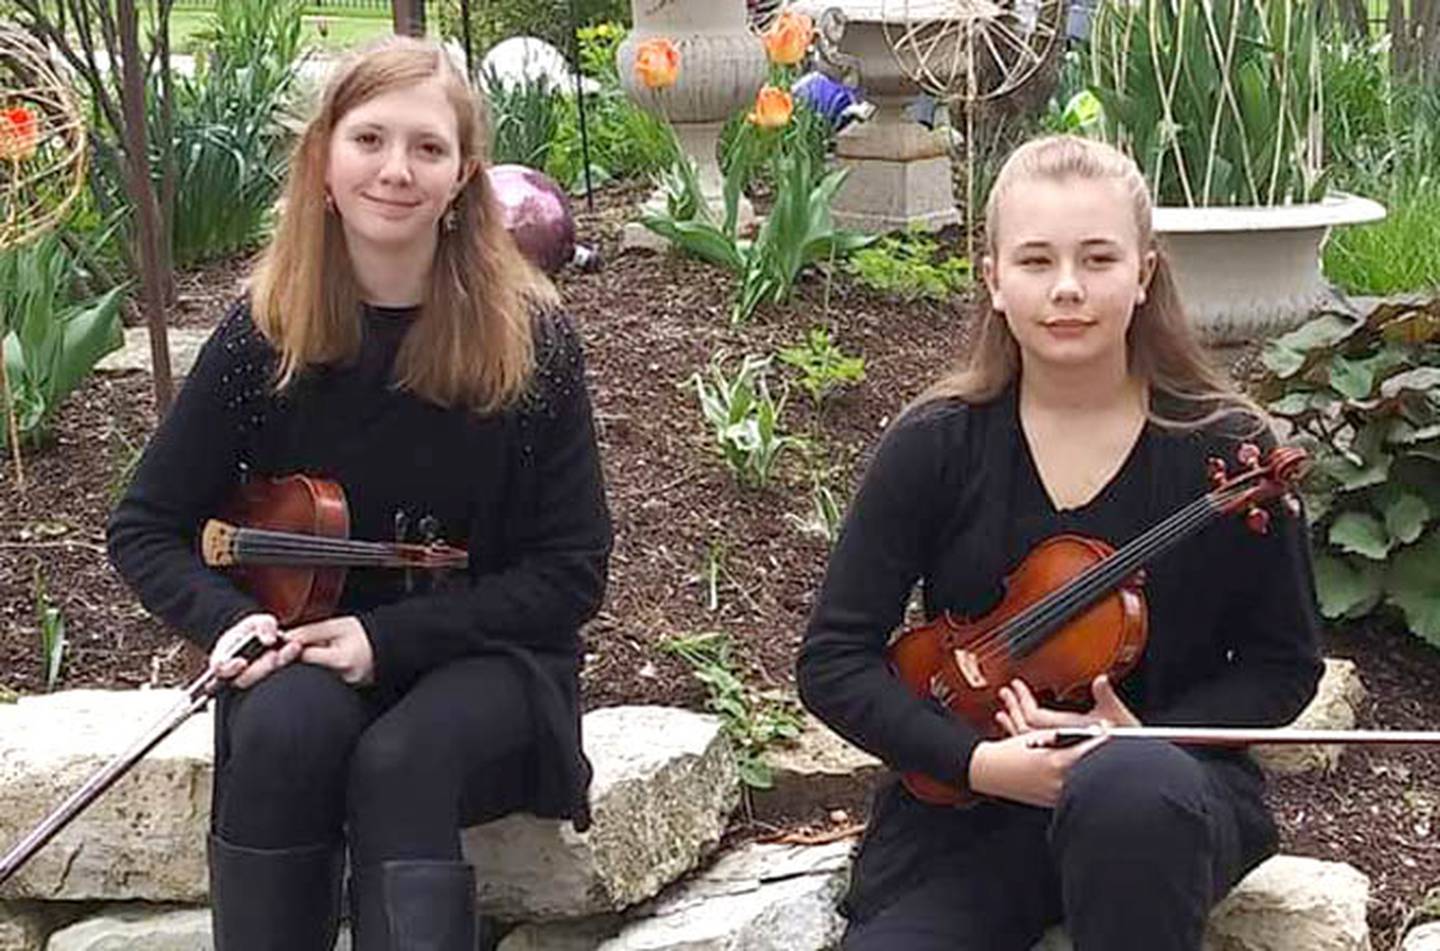 Eva Peterson and Emma Fredericks sit together in a garden with their violins in a photo taken by Fredericks' mom, Eileen Garvin.